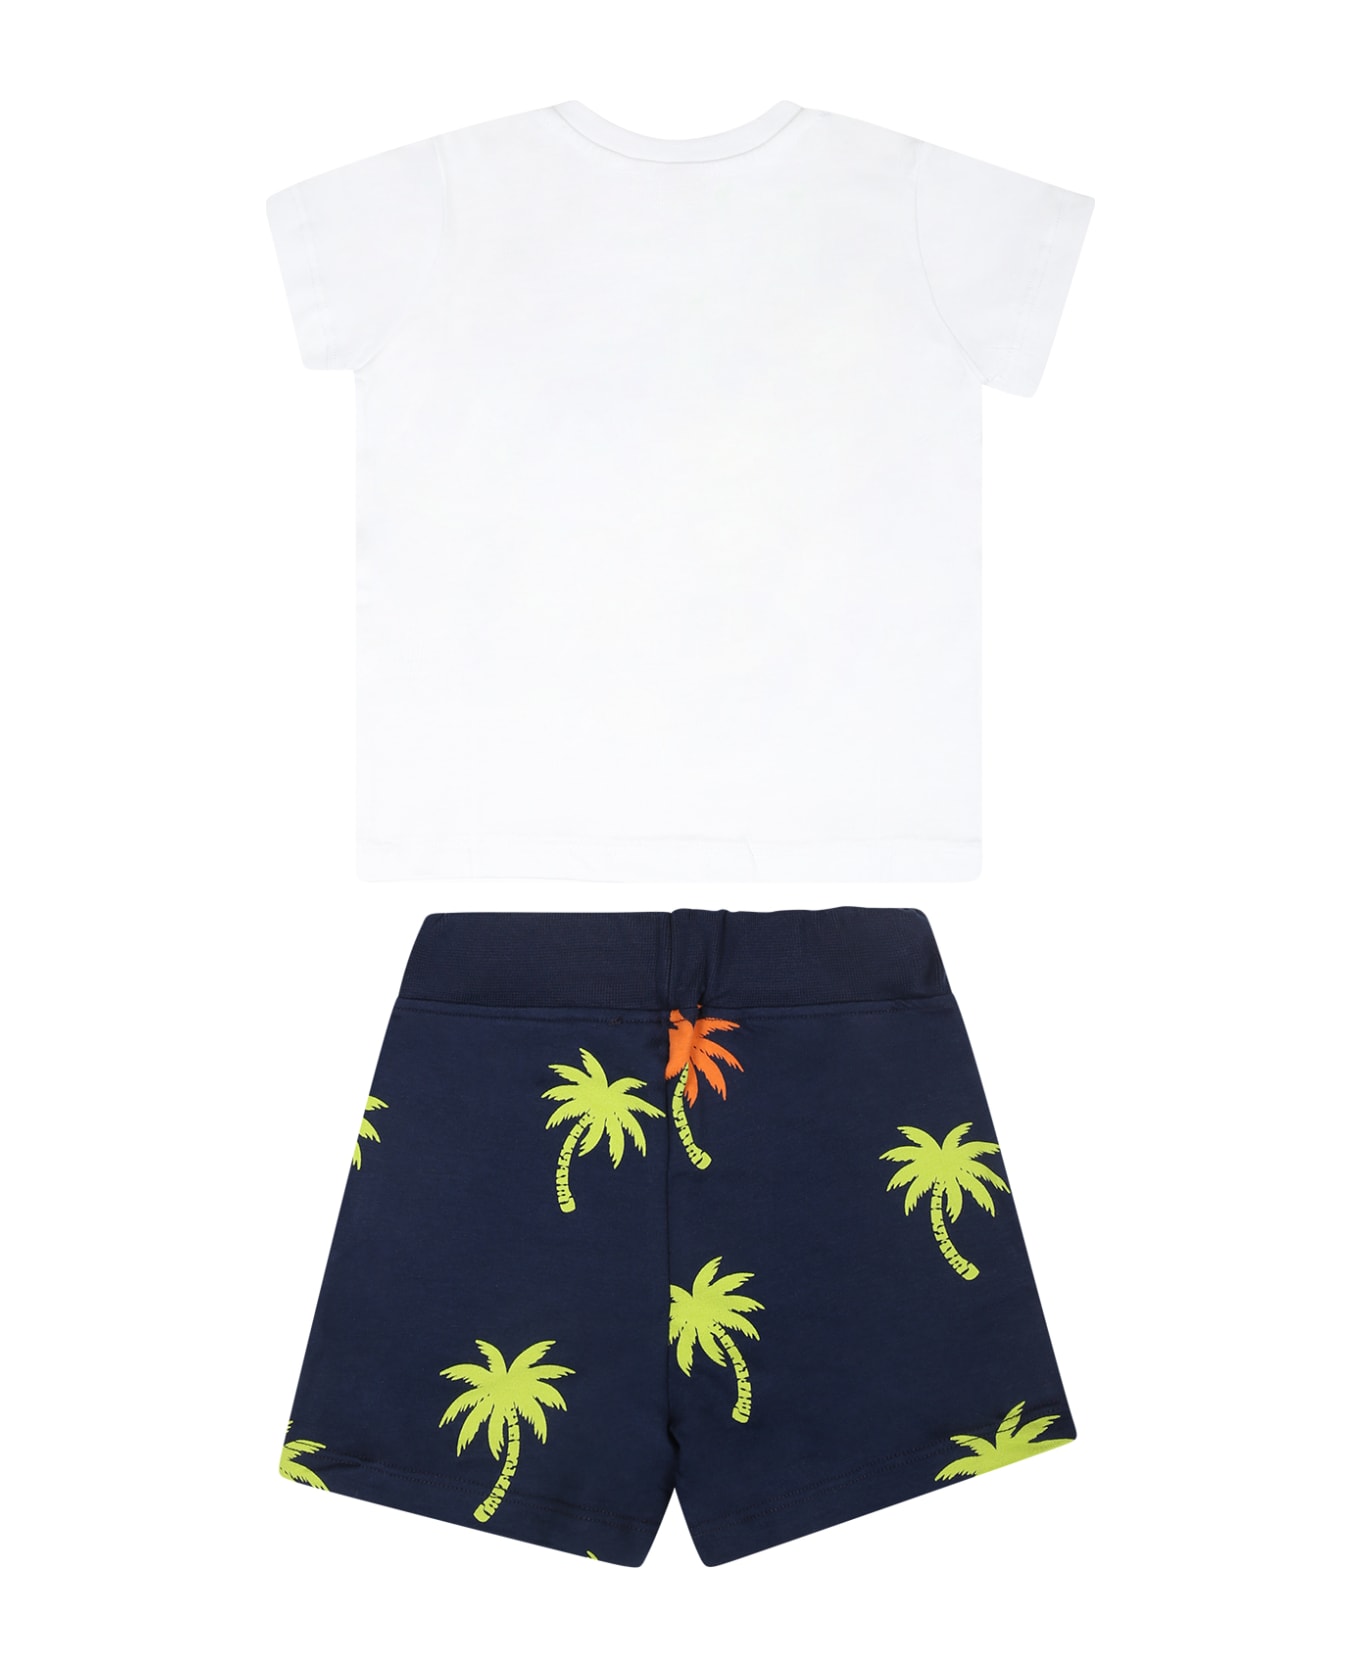 MSGM White Suit For Baby Boy With Logo And Palm Tree - Multicolor ボトムス